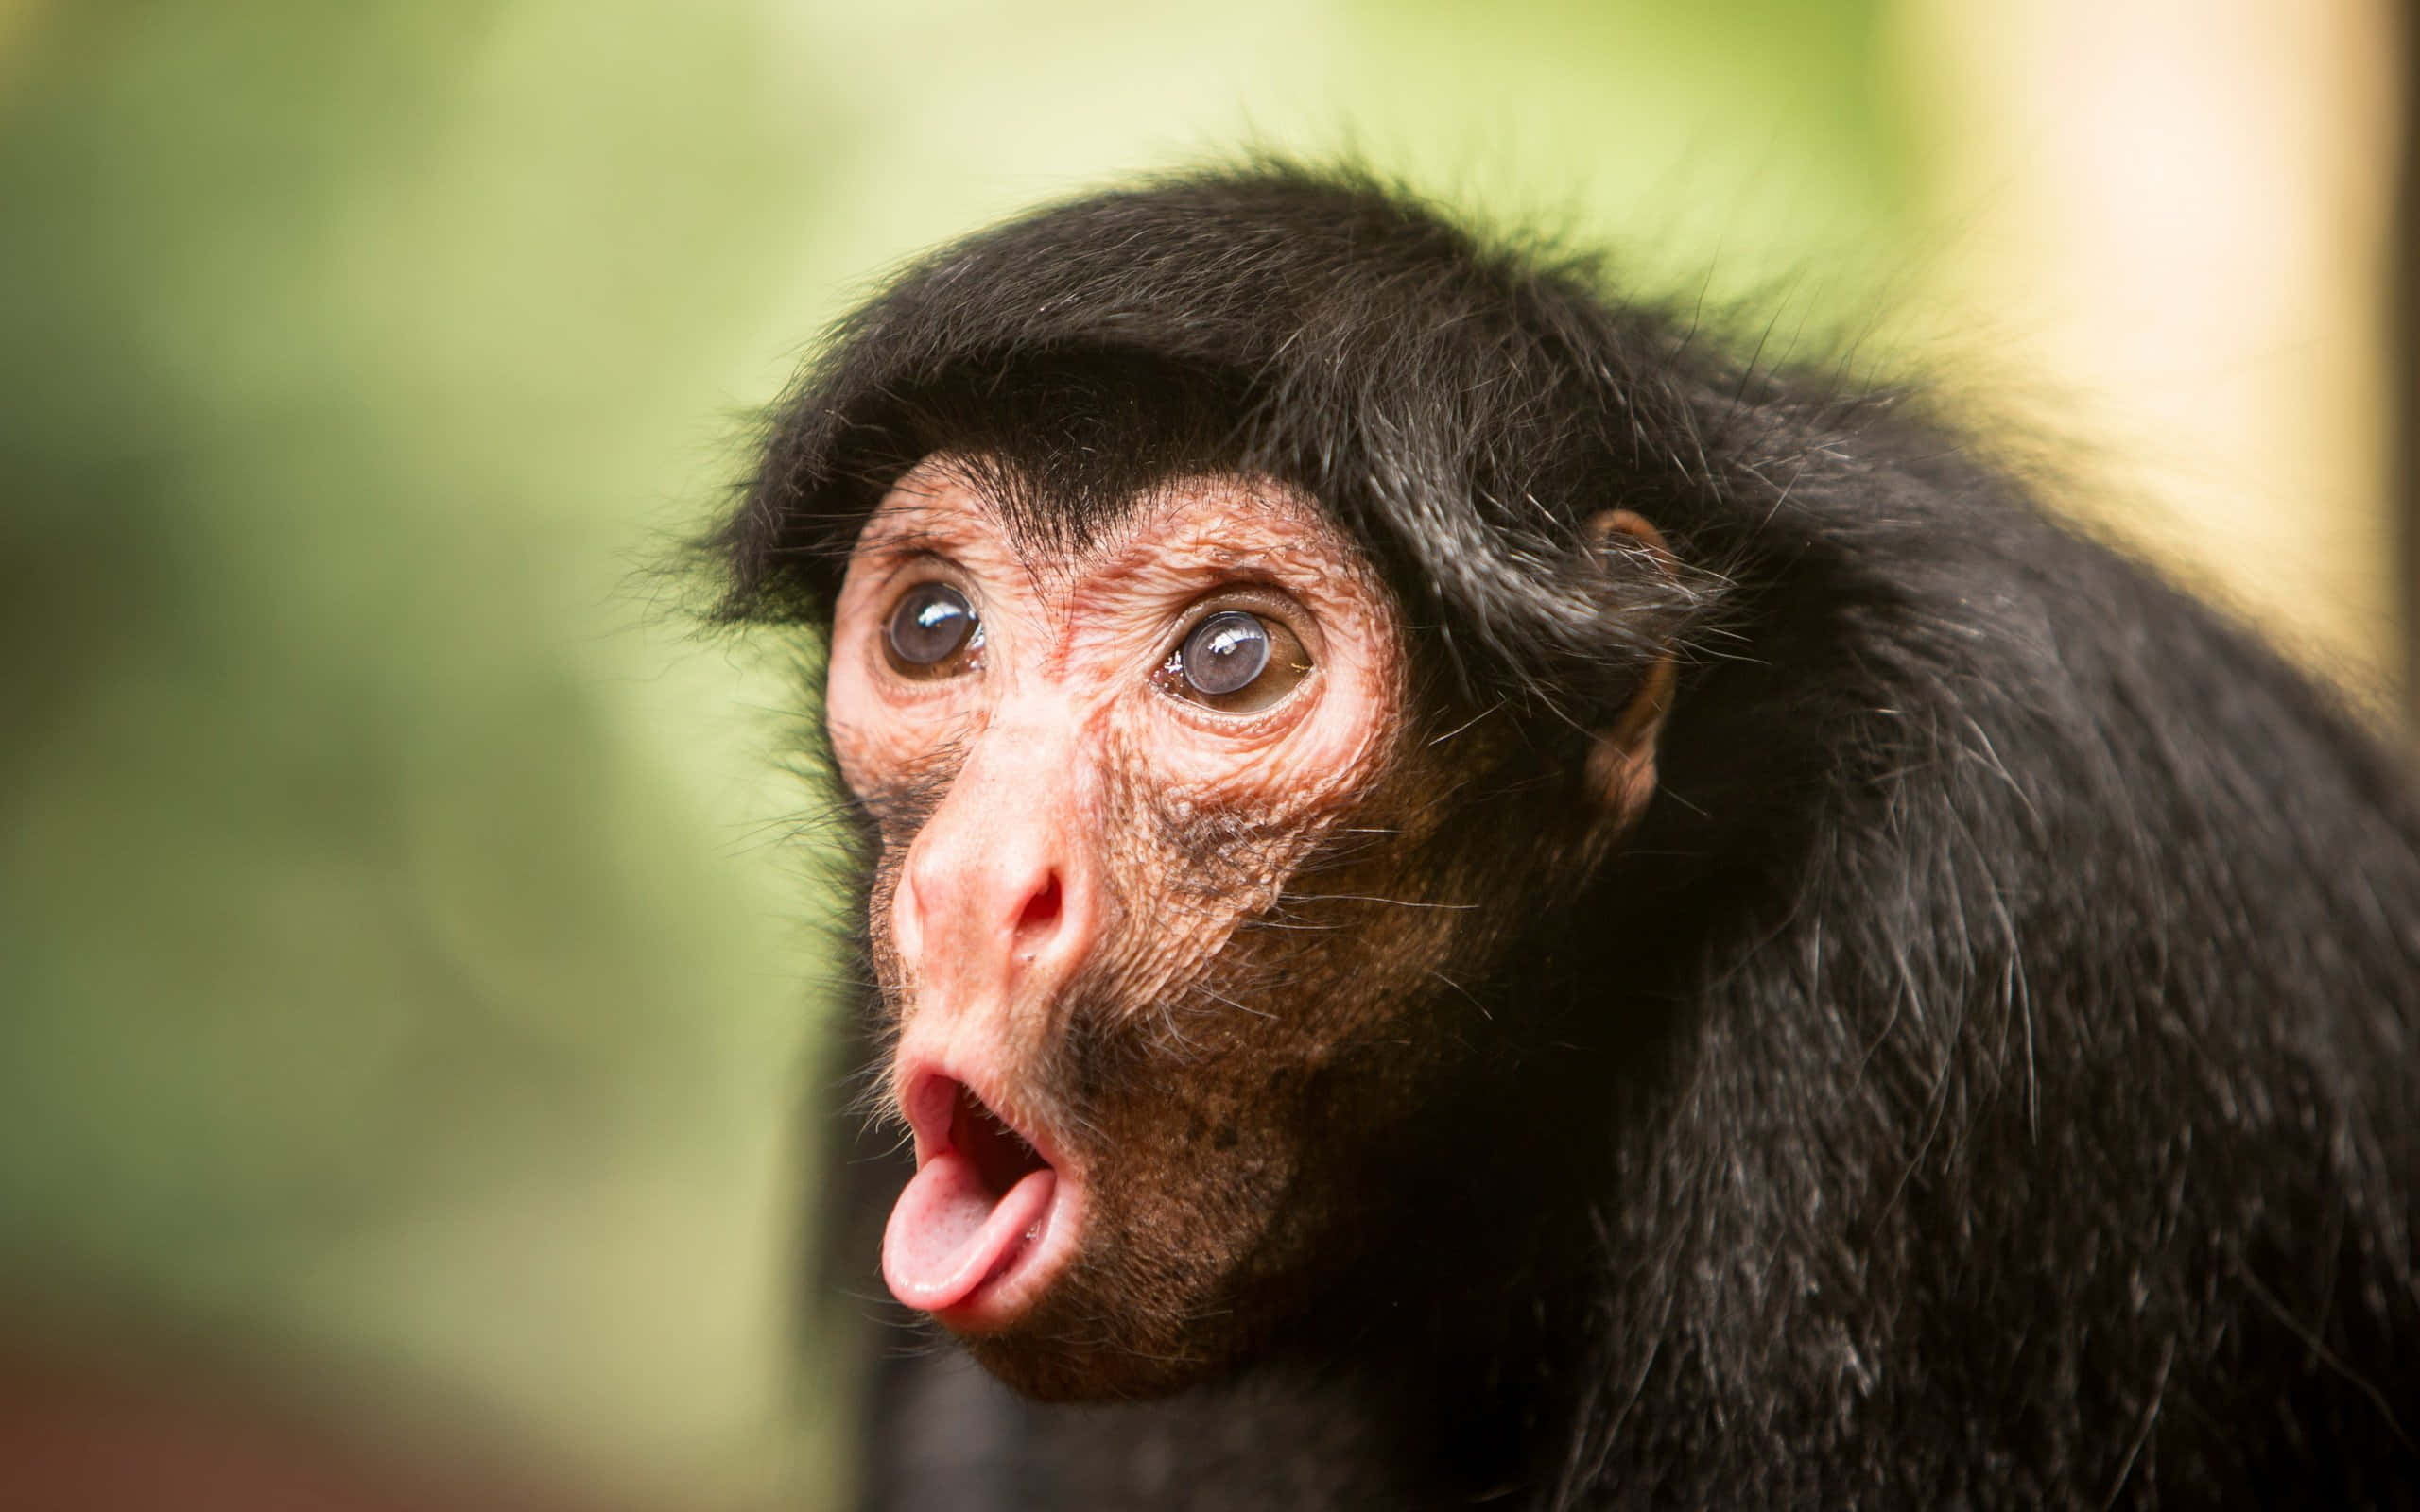 This monkey looks like it's having a laughing fit!